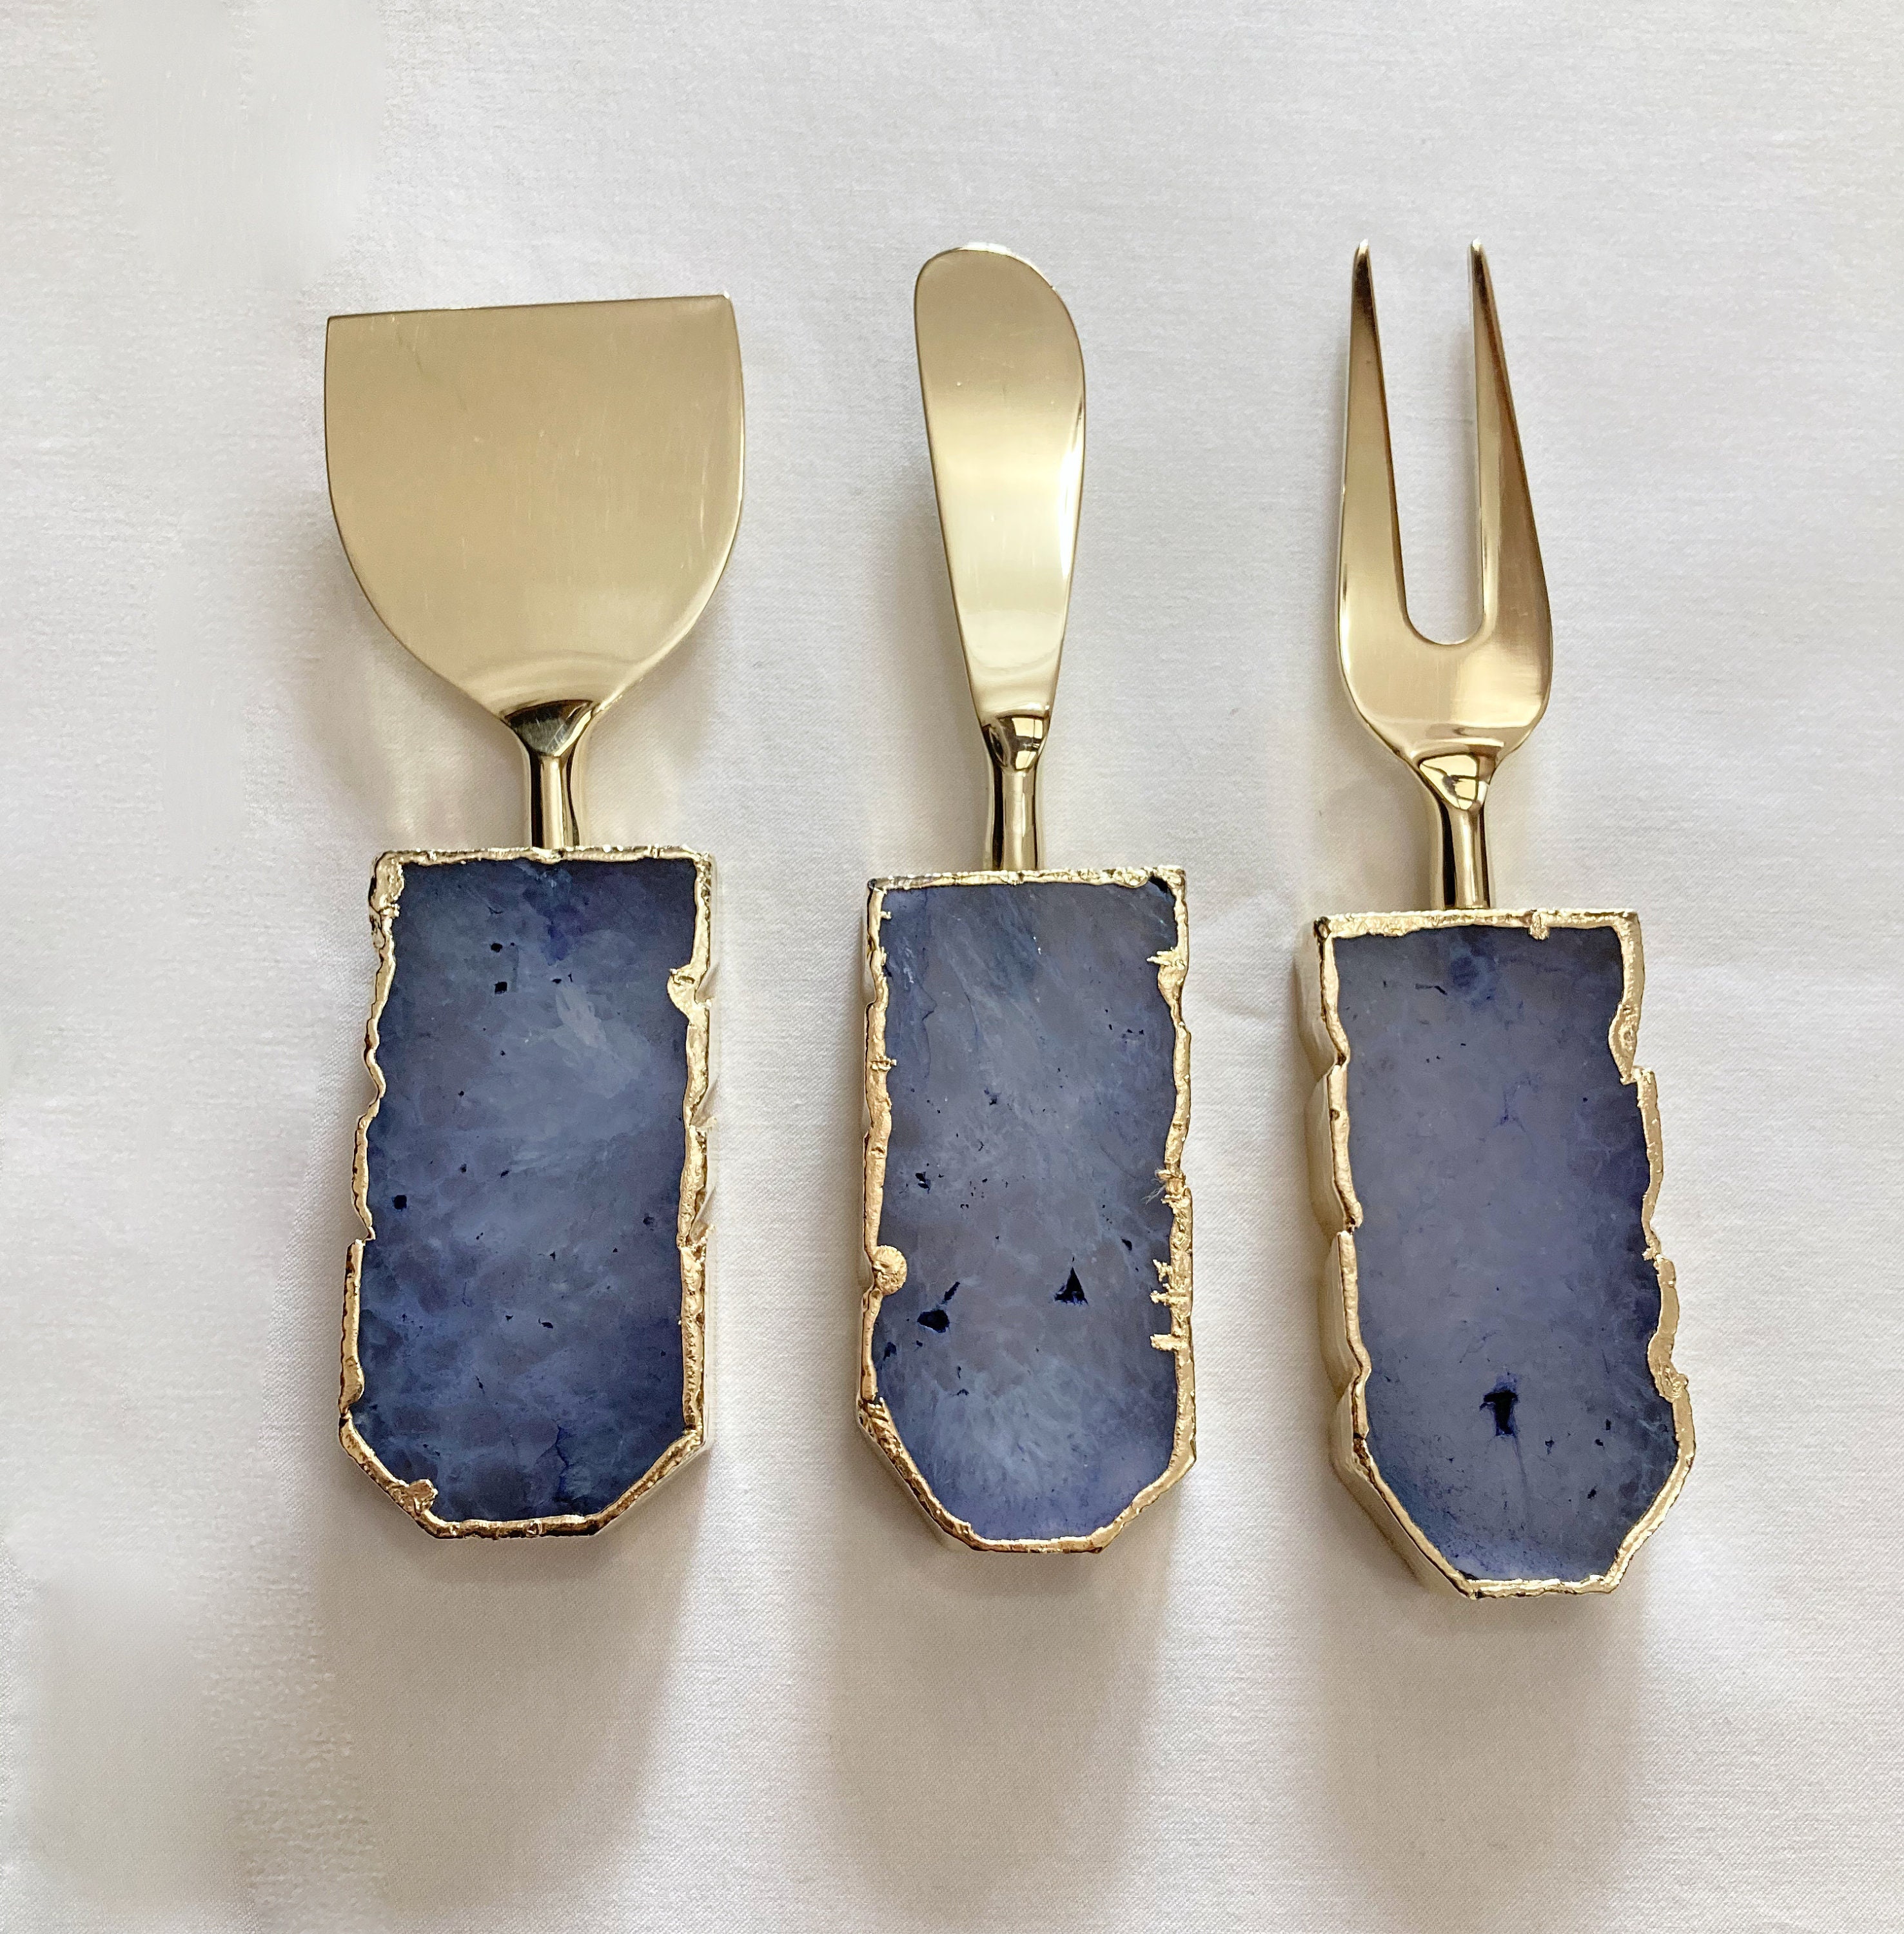 Gold and Blue Cheese Knife Set